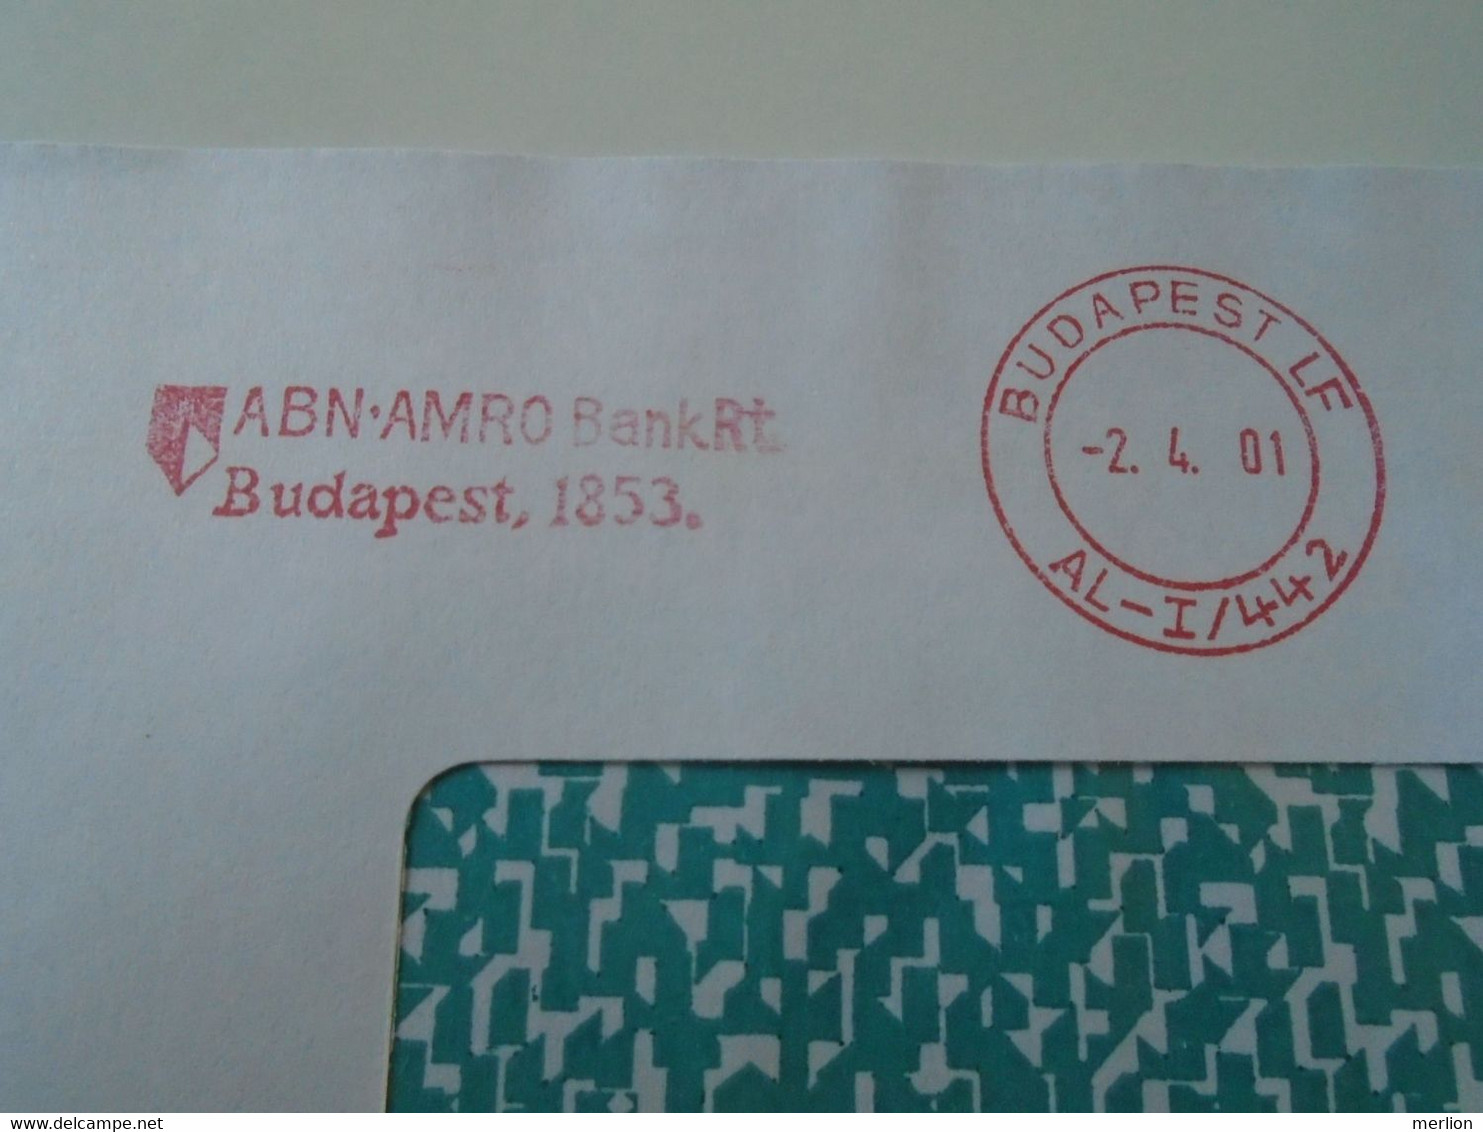 AD00012.118  Hungary Cover  -EMA Red Meter Freistempel-   2001   Budapest  ABN AMRO  Bank - Timbres De Distributeurs [ATM]